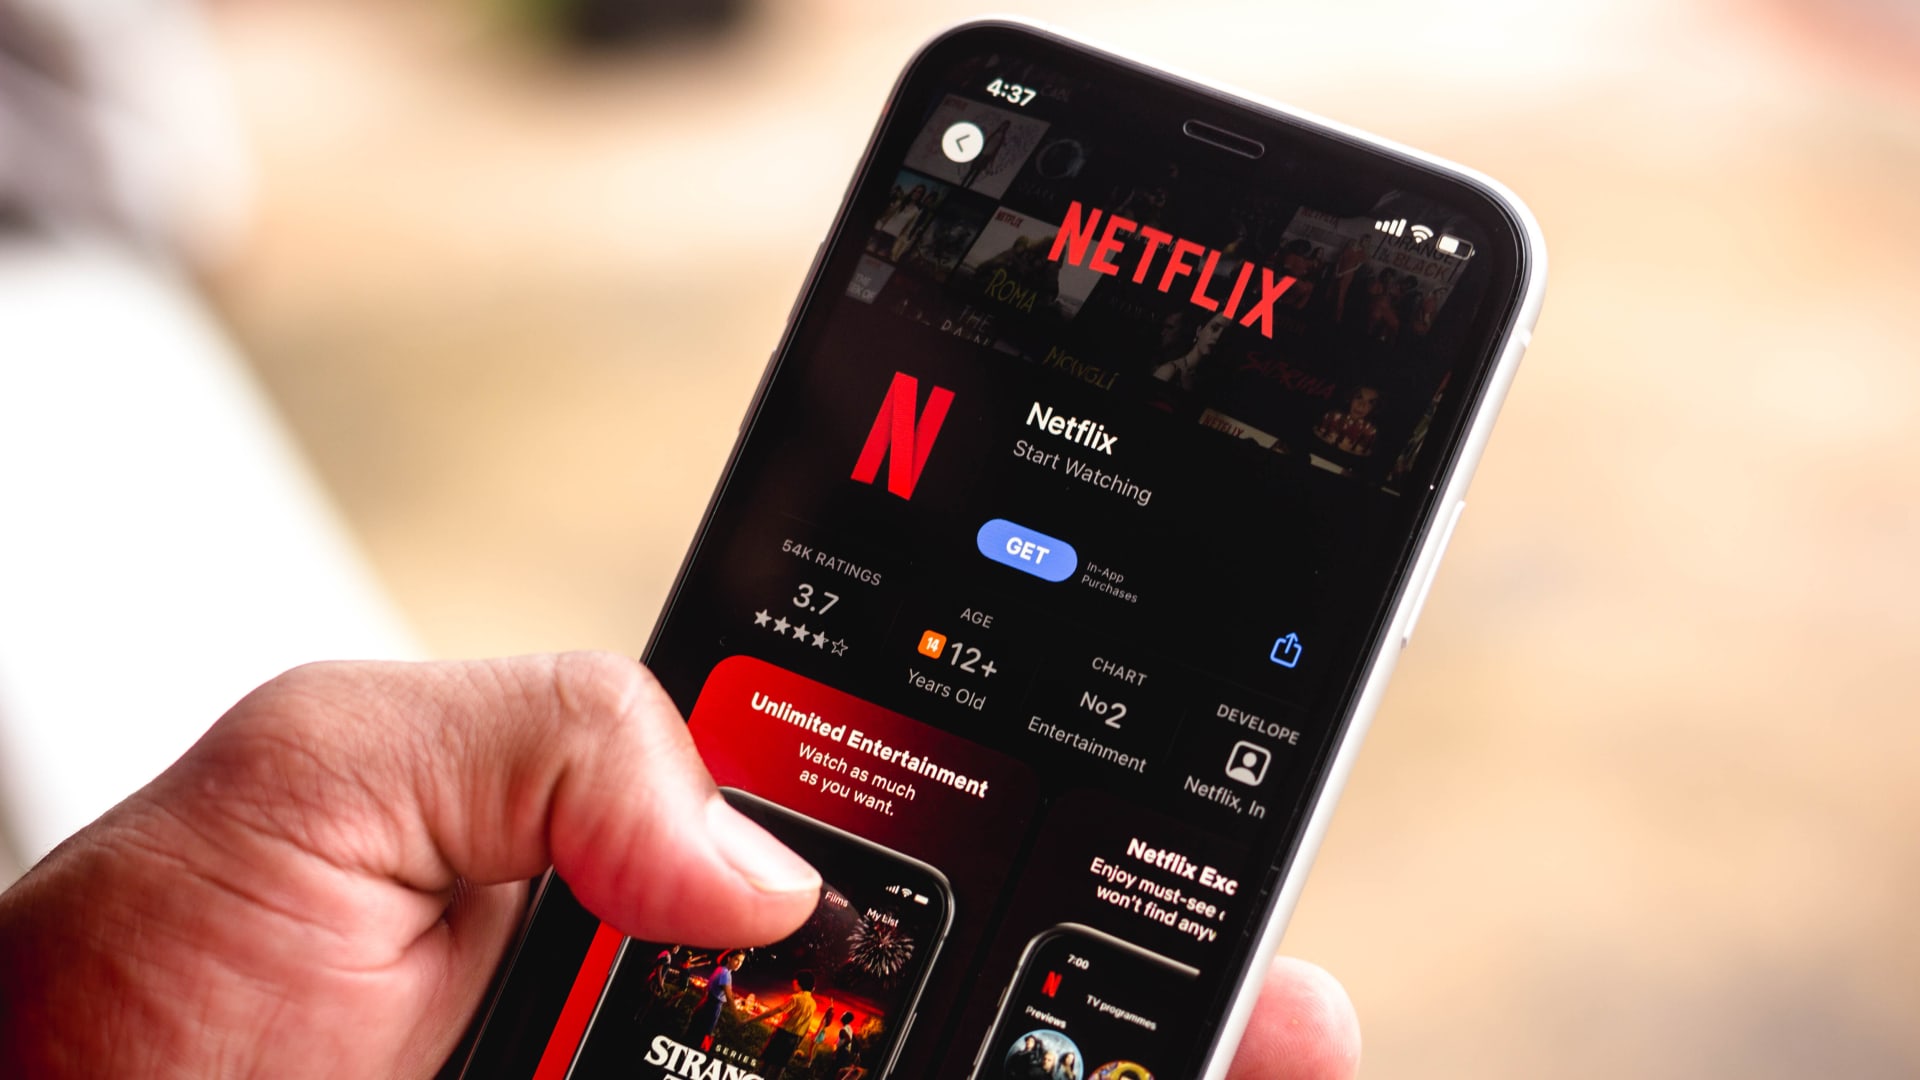 Netflix is exploring lower-priced, ad-supported plans after years of resisting